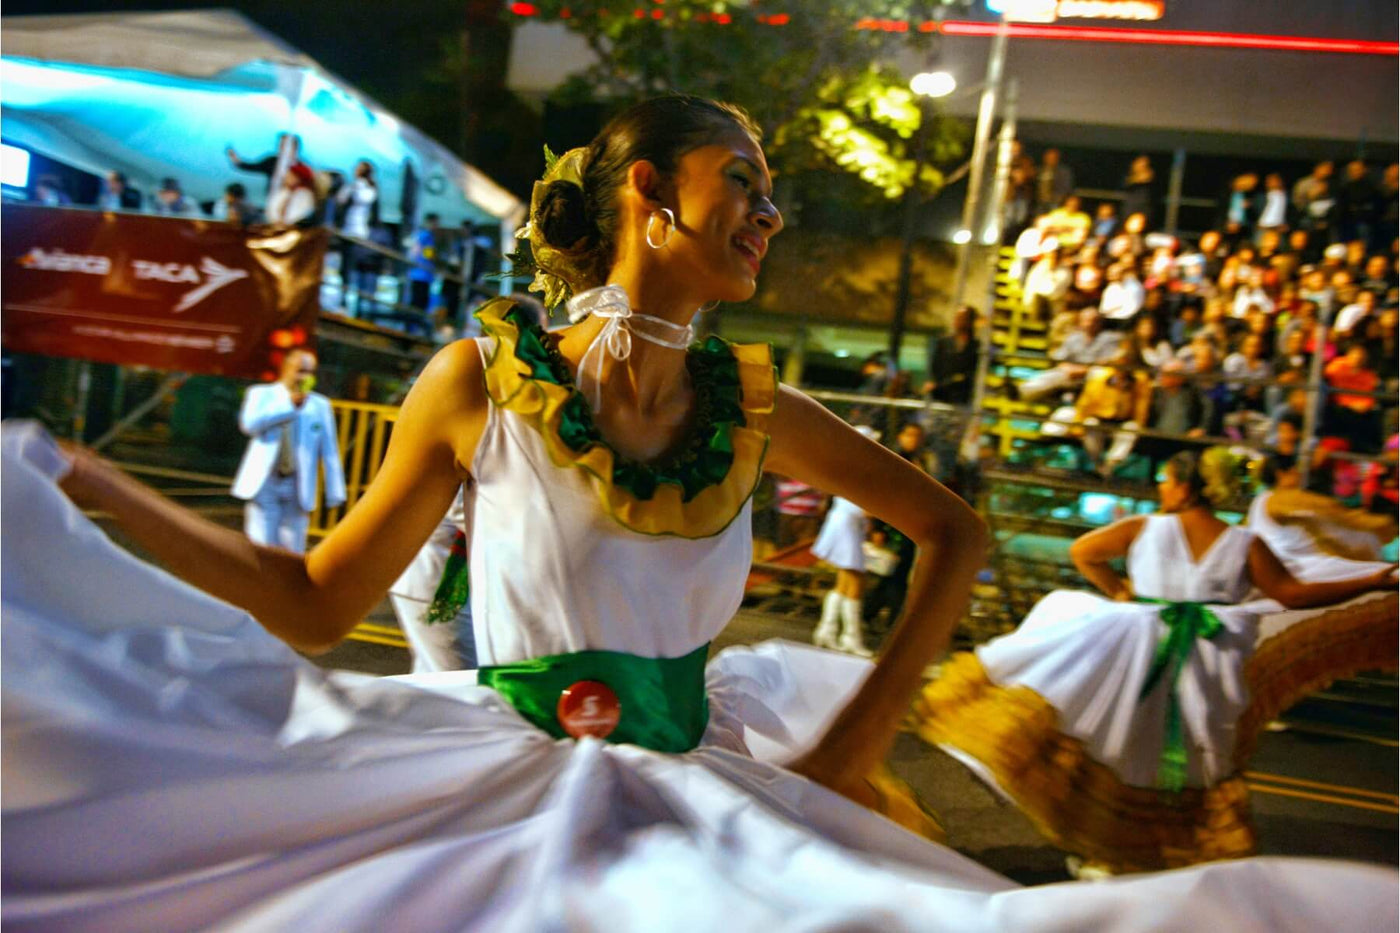 Discover seven popular holiday traditions celebrated in Central America.